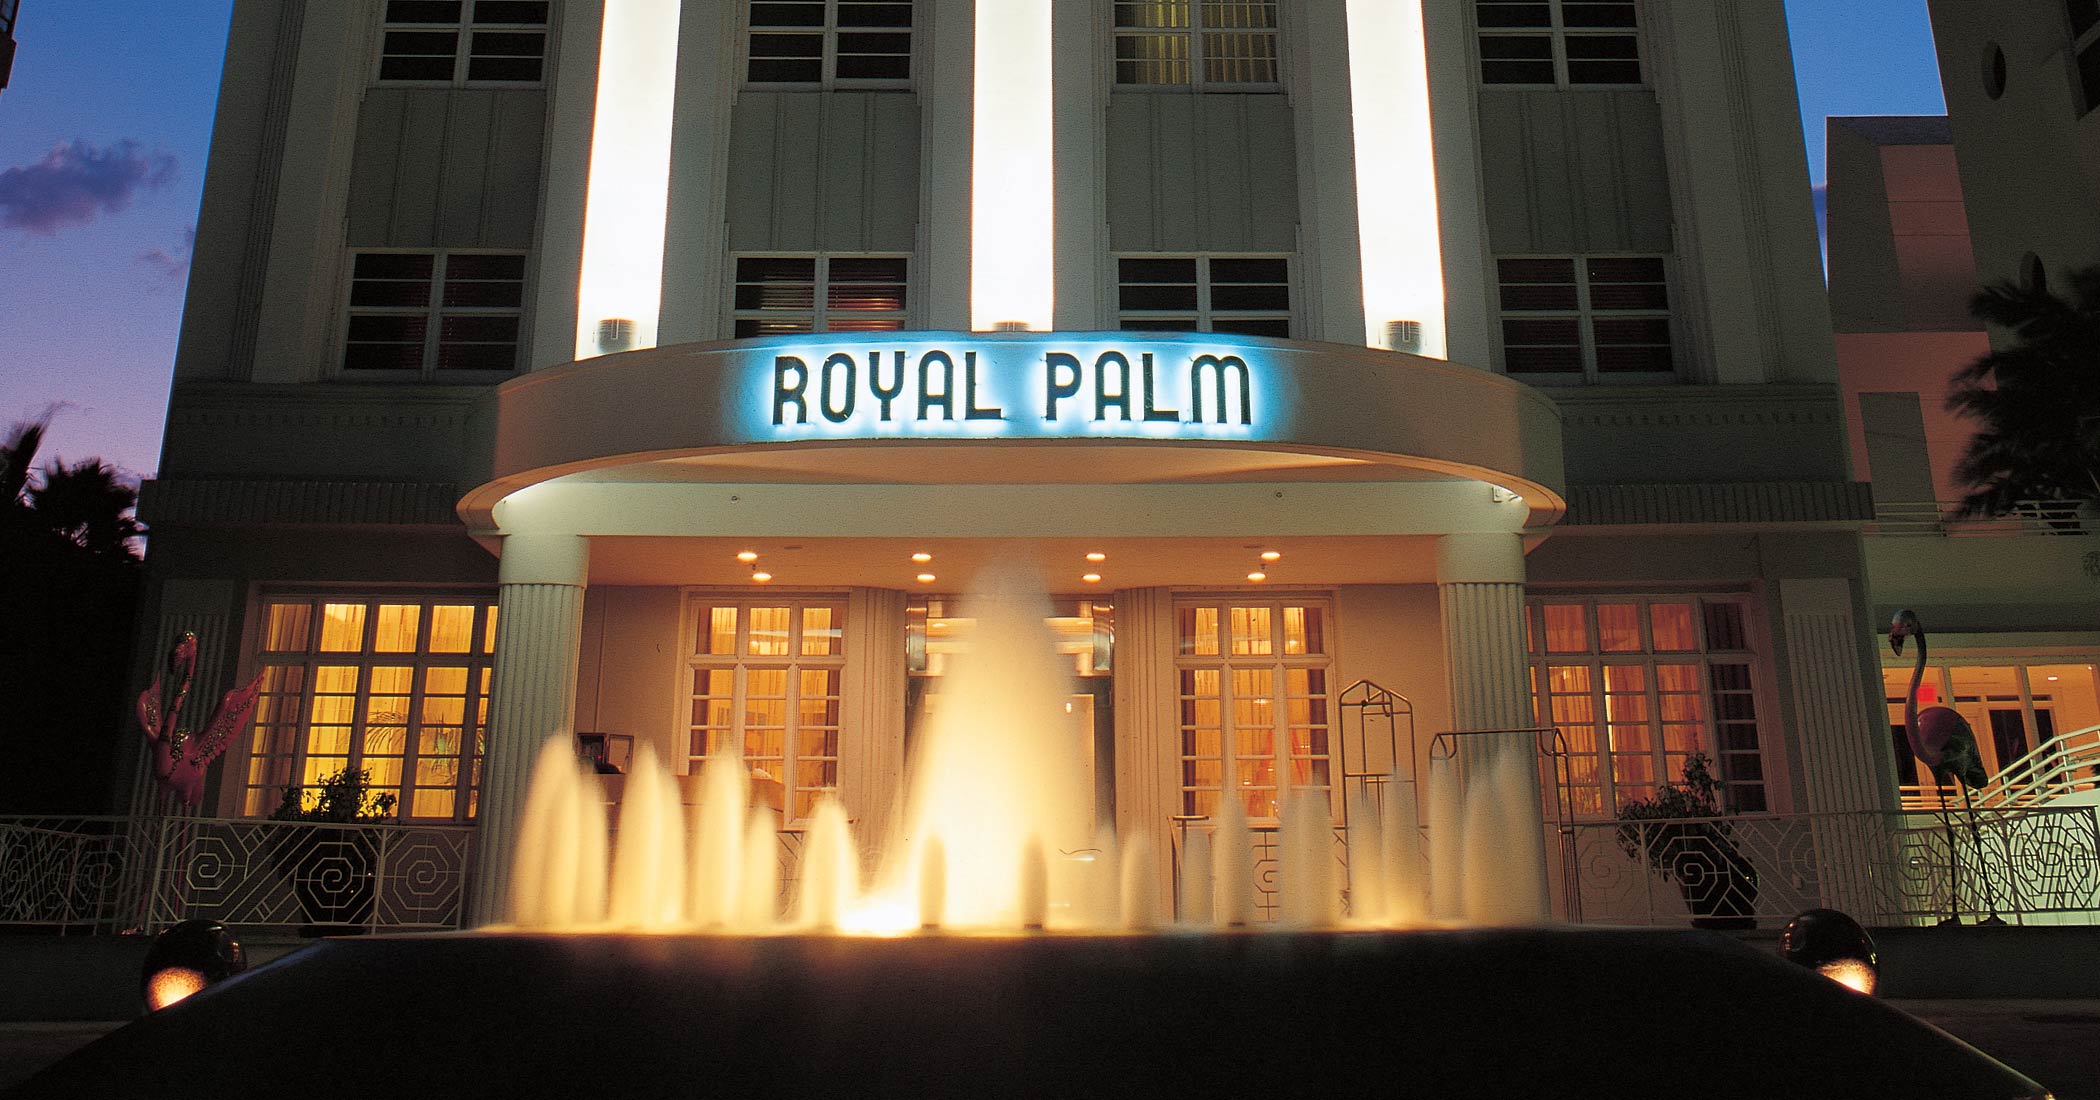 The Royal Palm Hotel - The Peebles Corporation